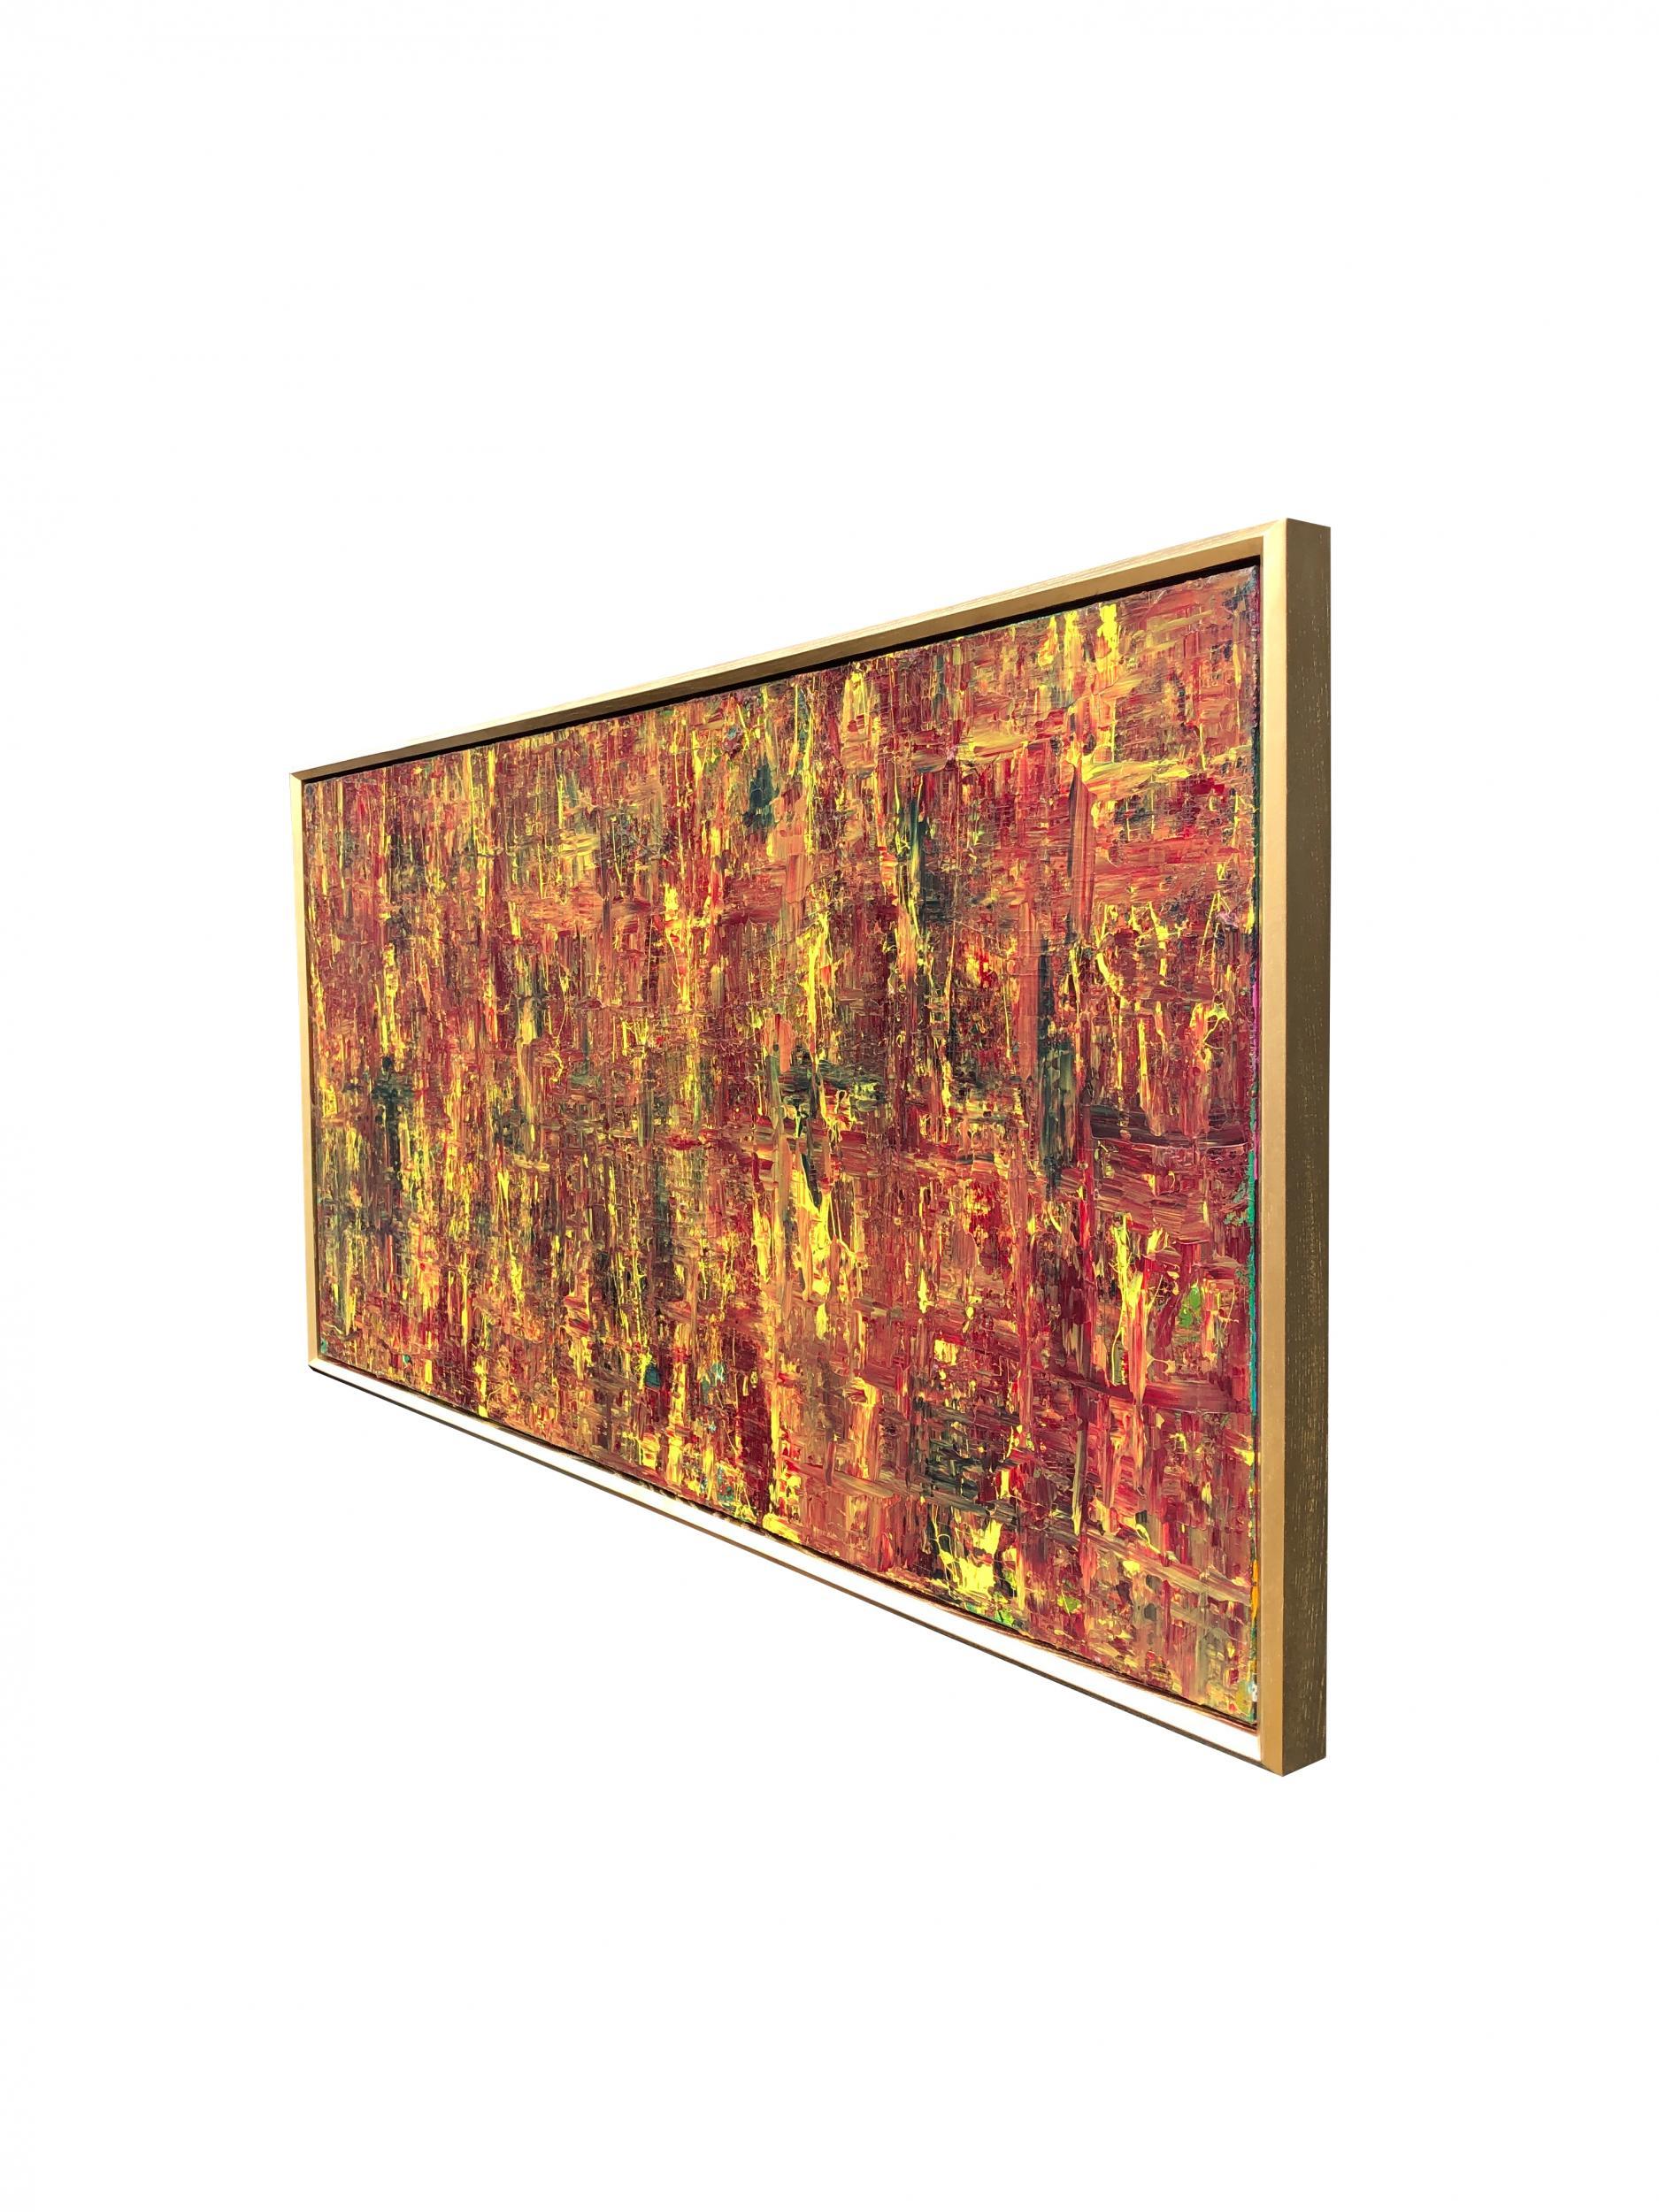 Memories By Troy Smith With Gilt Frame Fine Art Abstract Art For Sale 5